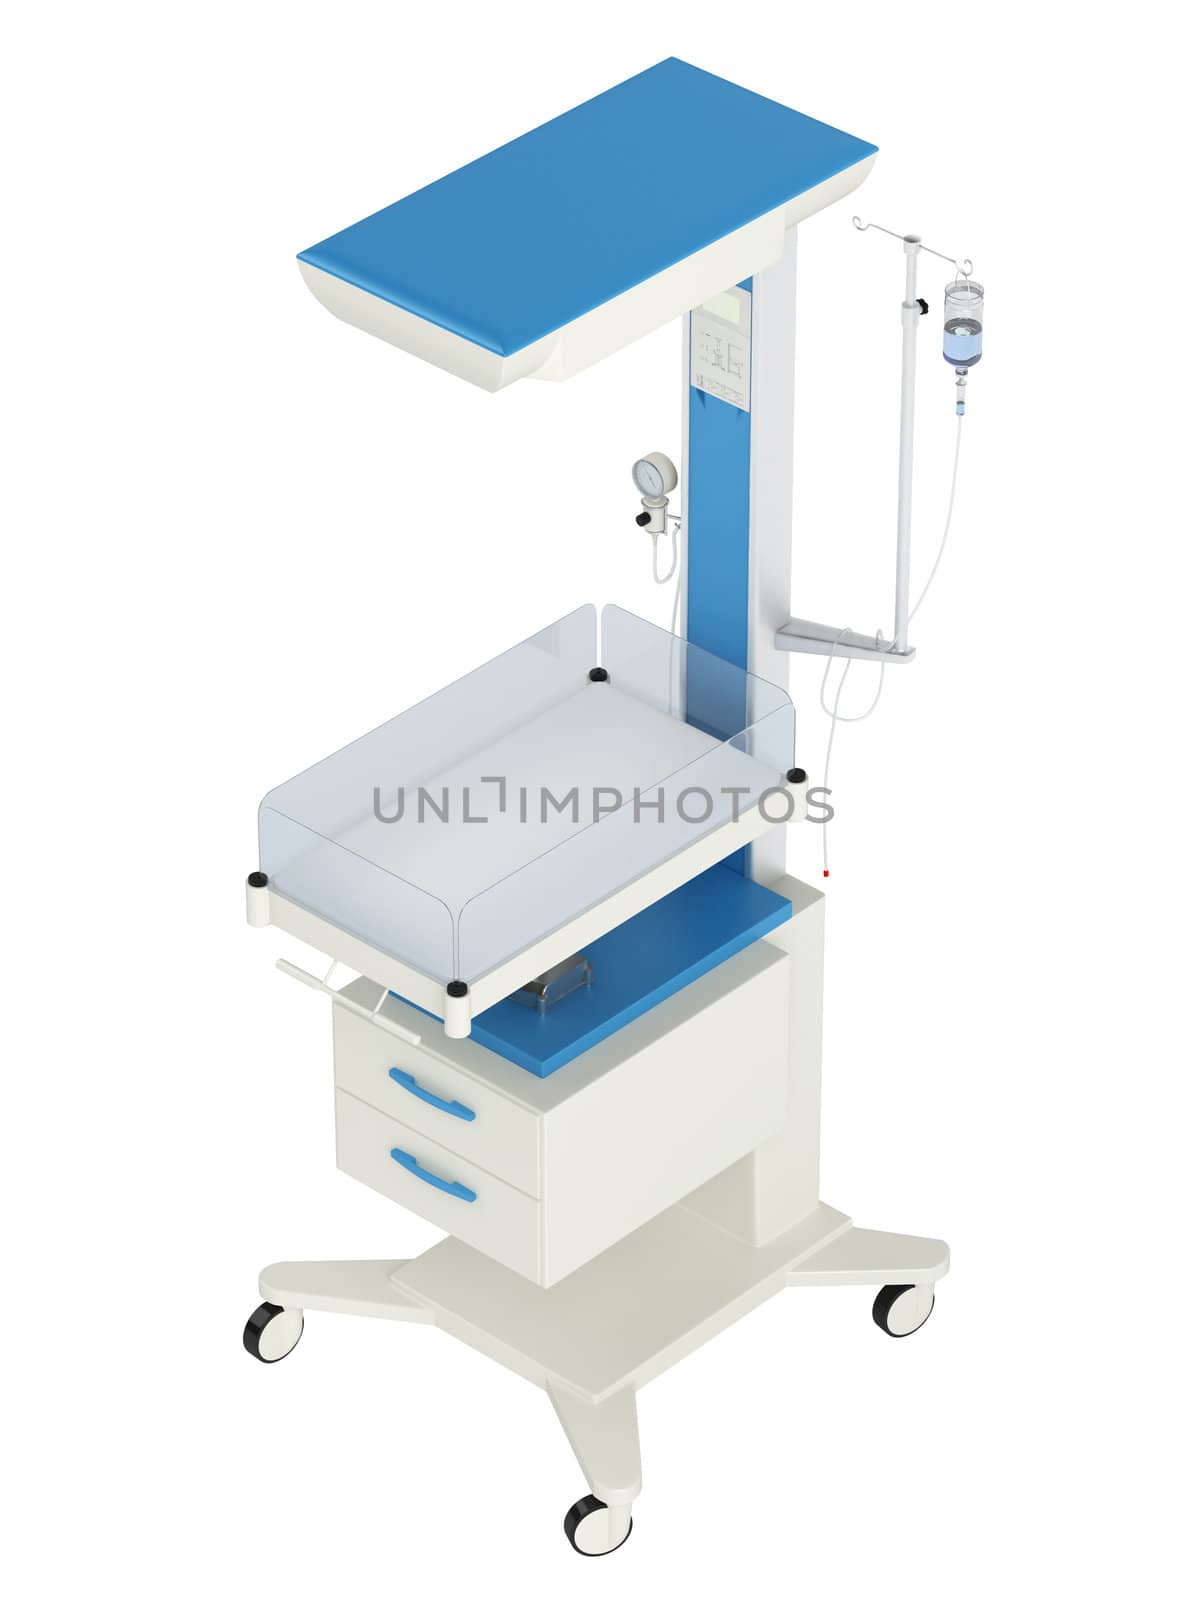 Neonatal reanimation and warming table used in obstetrics and gynaecology to revive a newborn baby at the time of birth isolated on white